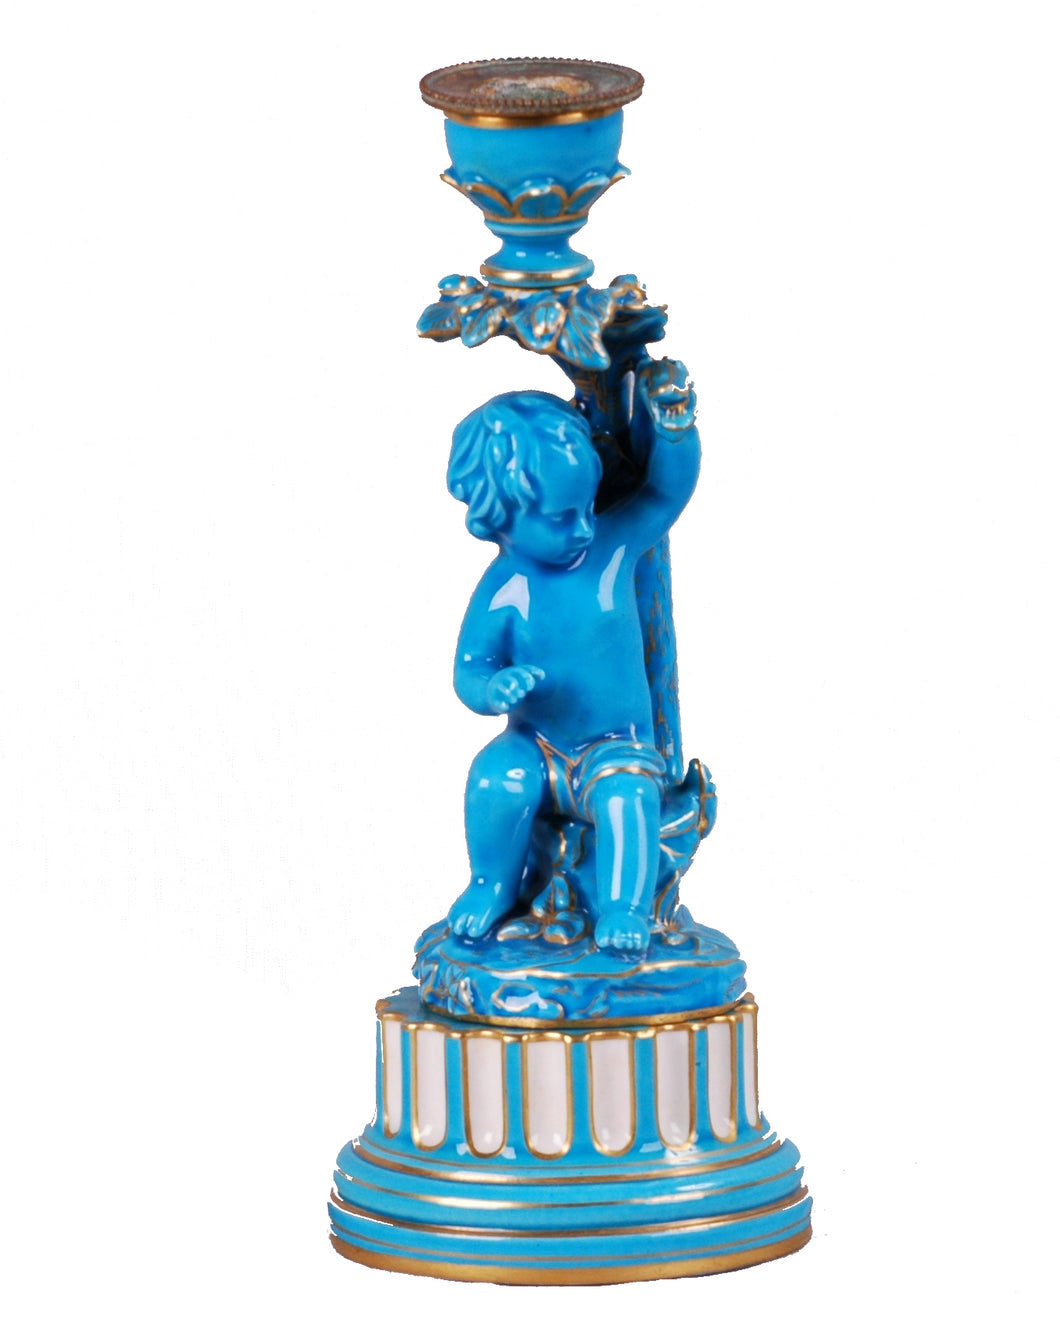 Sèvres style turquoise glazed figural candlestick